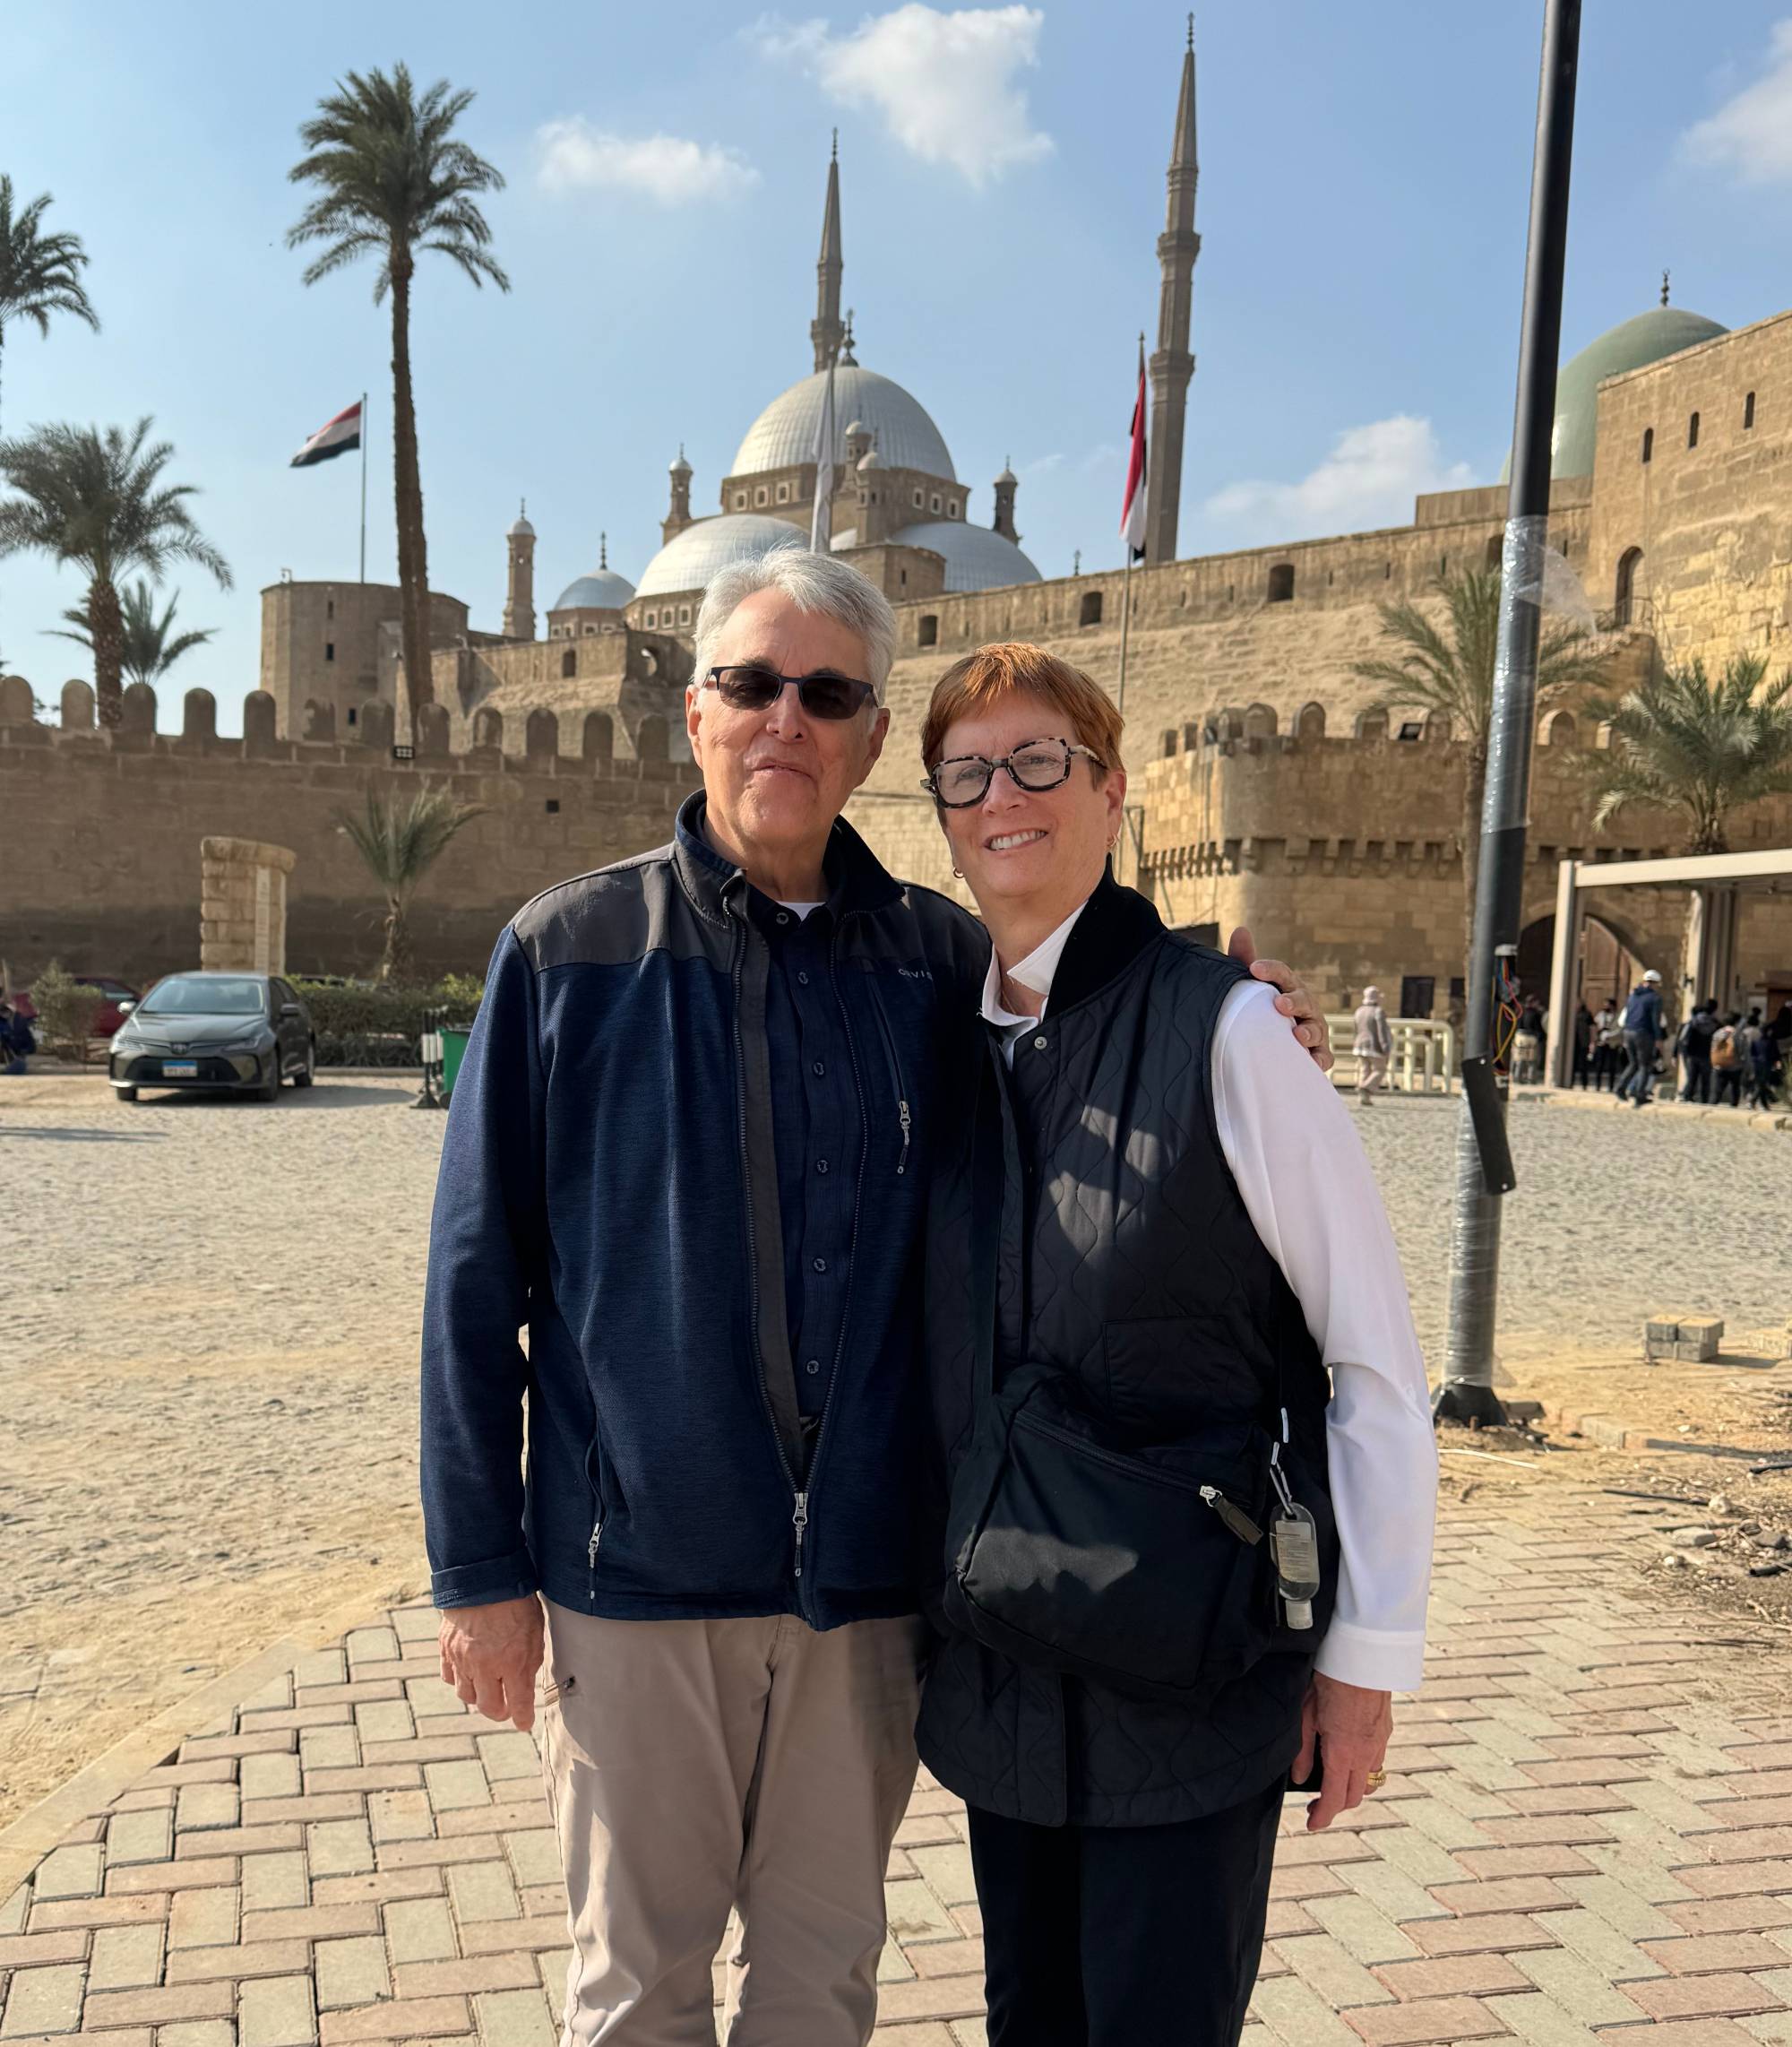 Lisa Kasmer and her husband while traveling